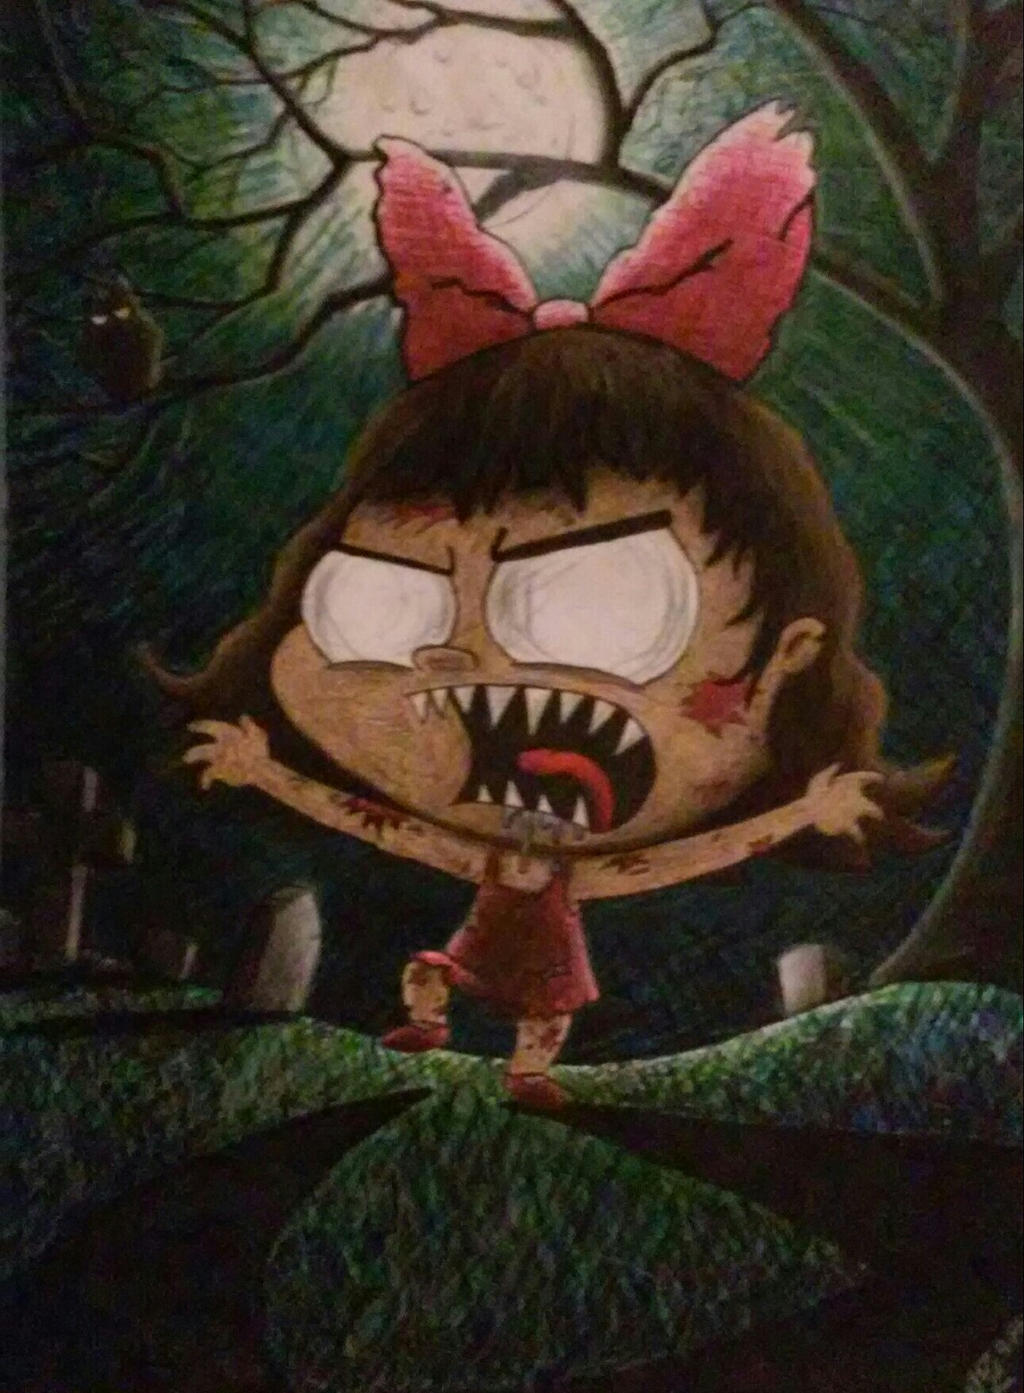 Zombie Mae (cropped version)